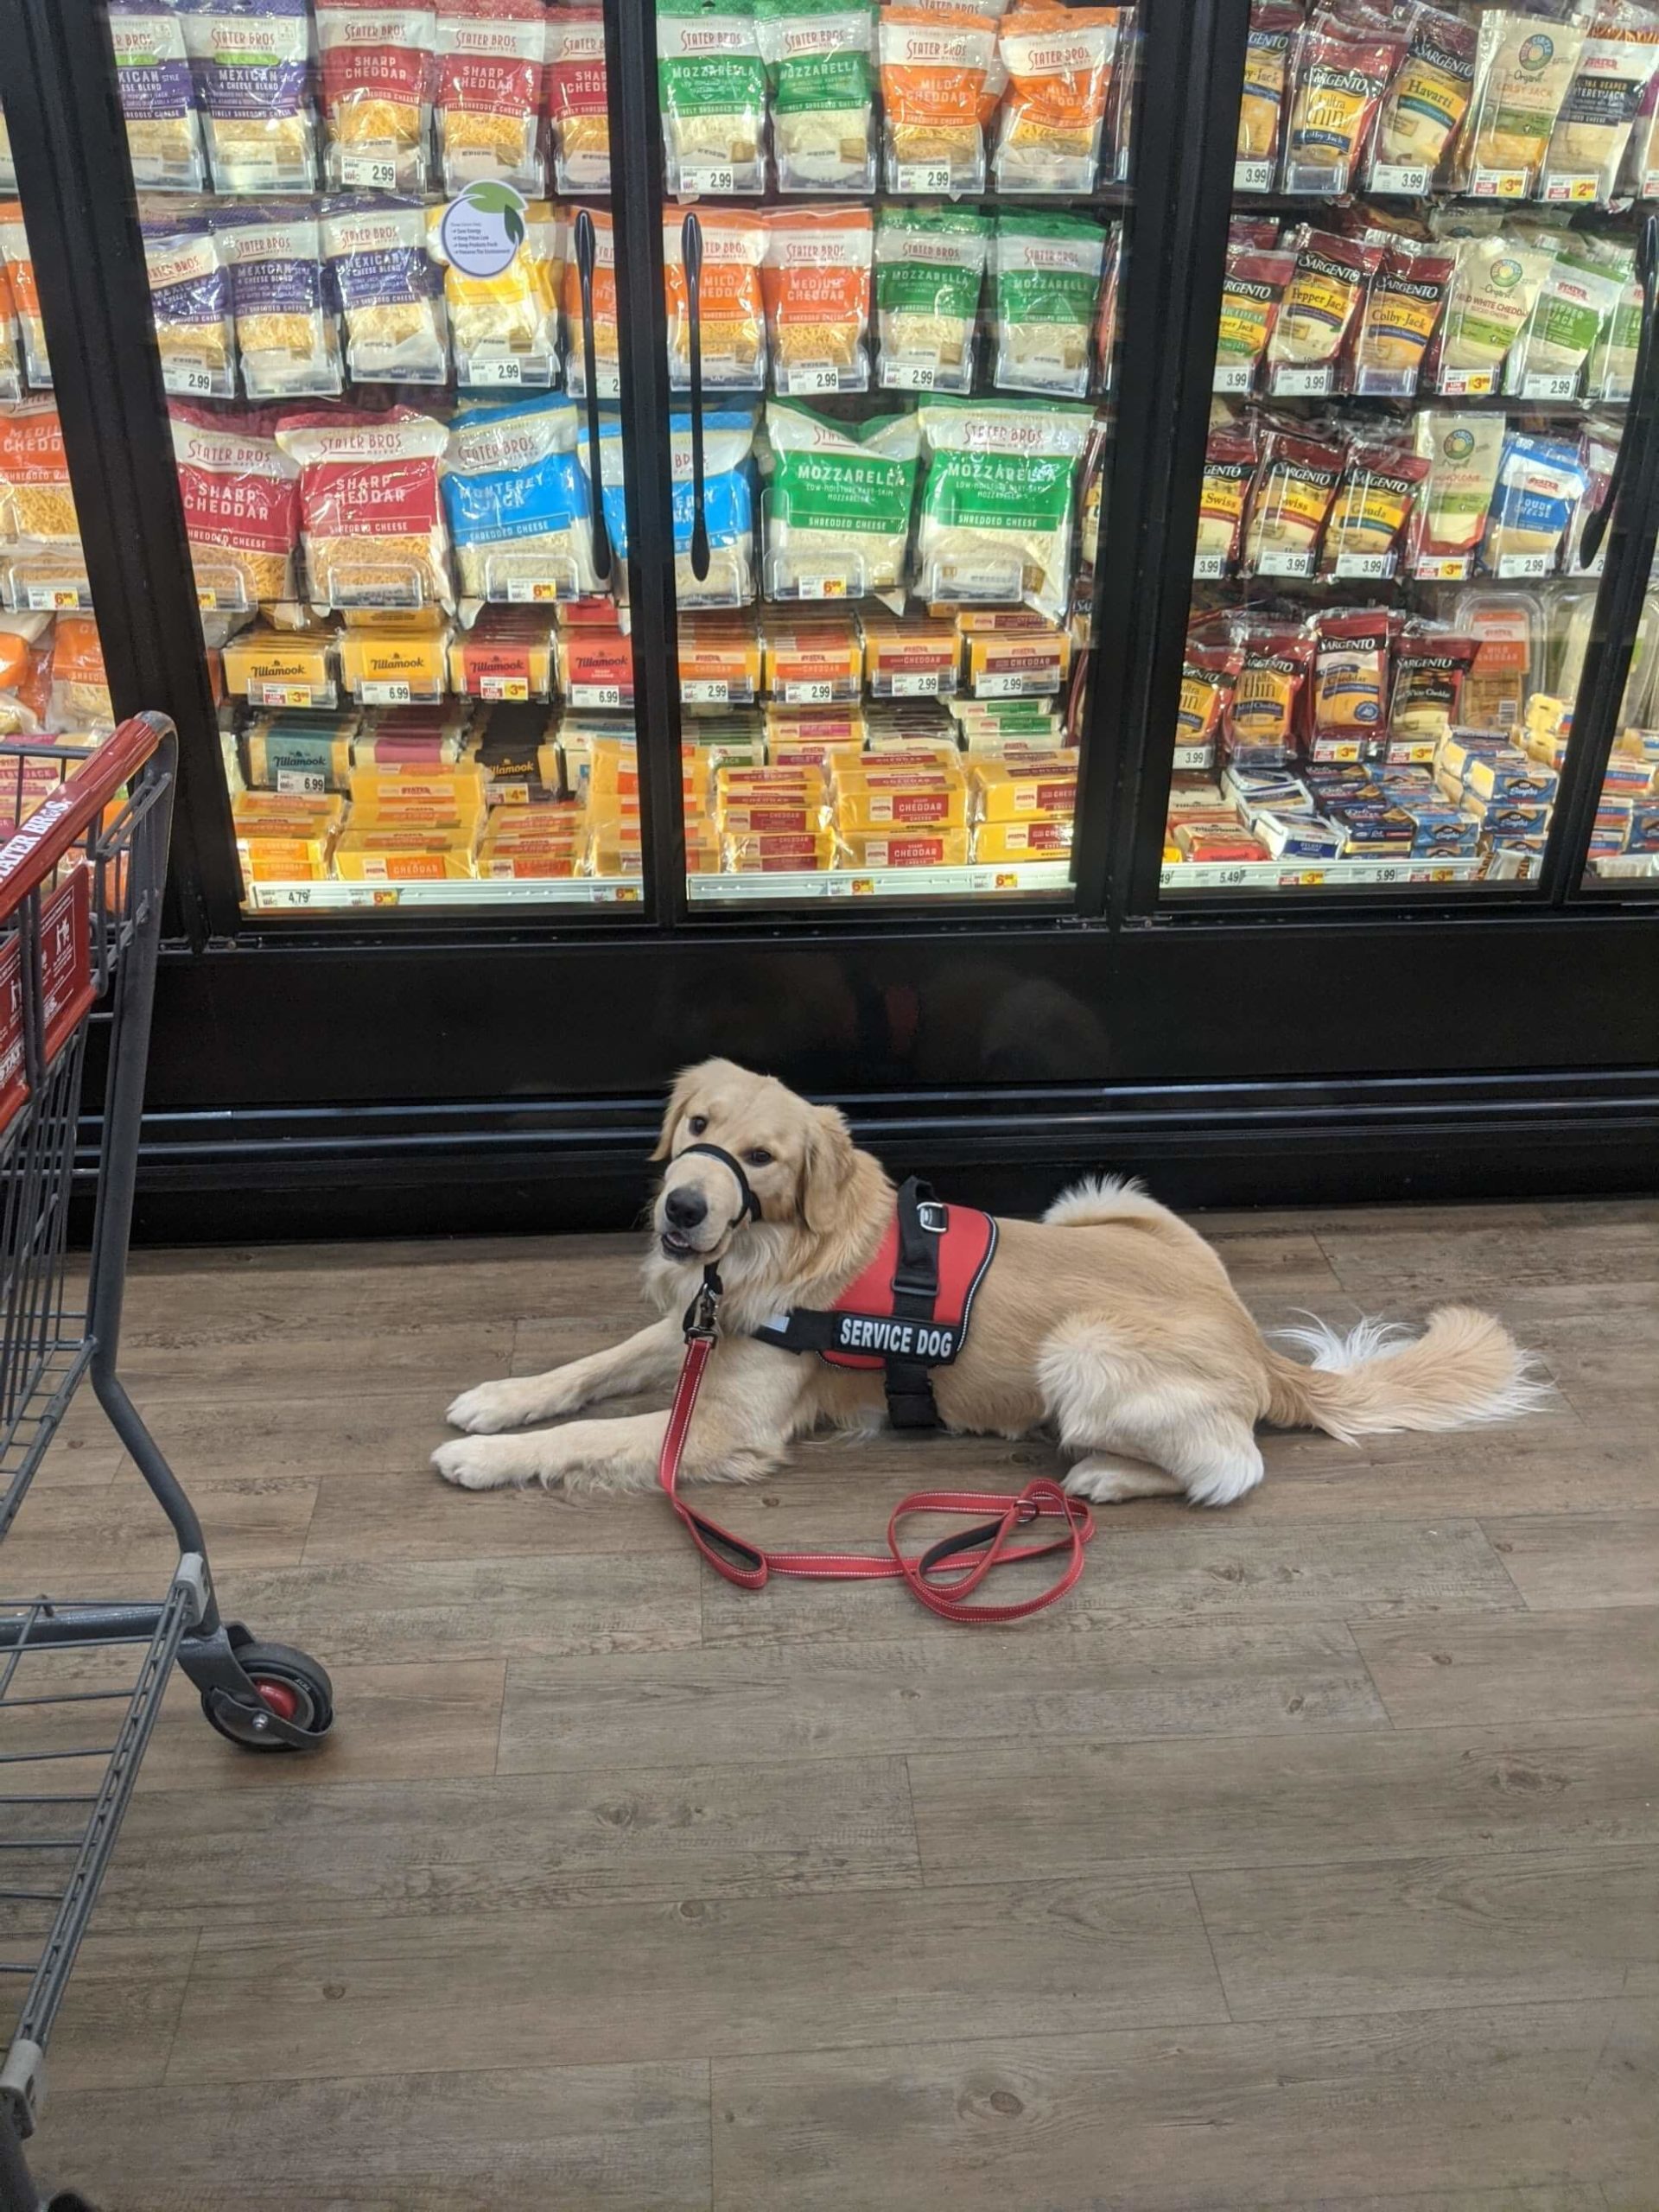 service dog in grocery store